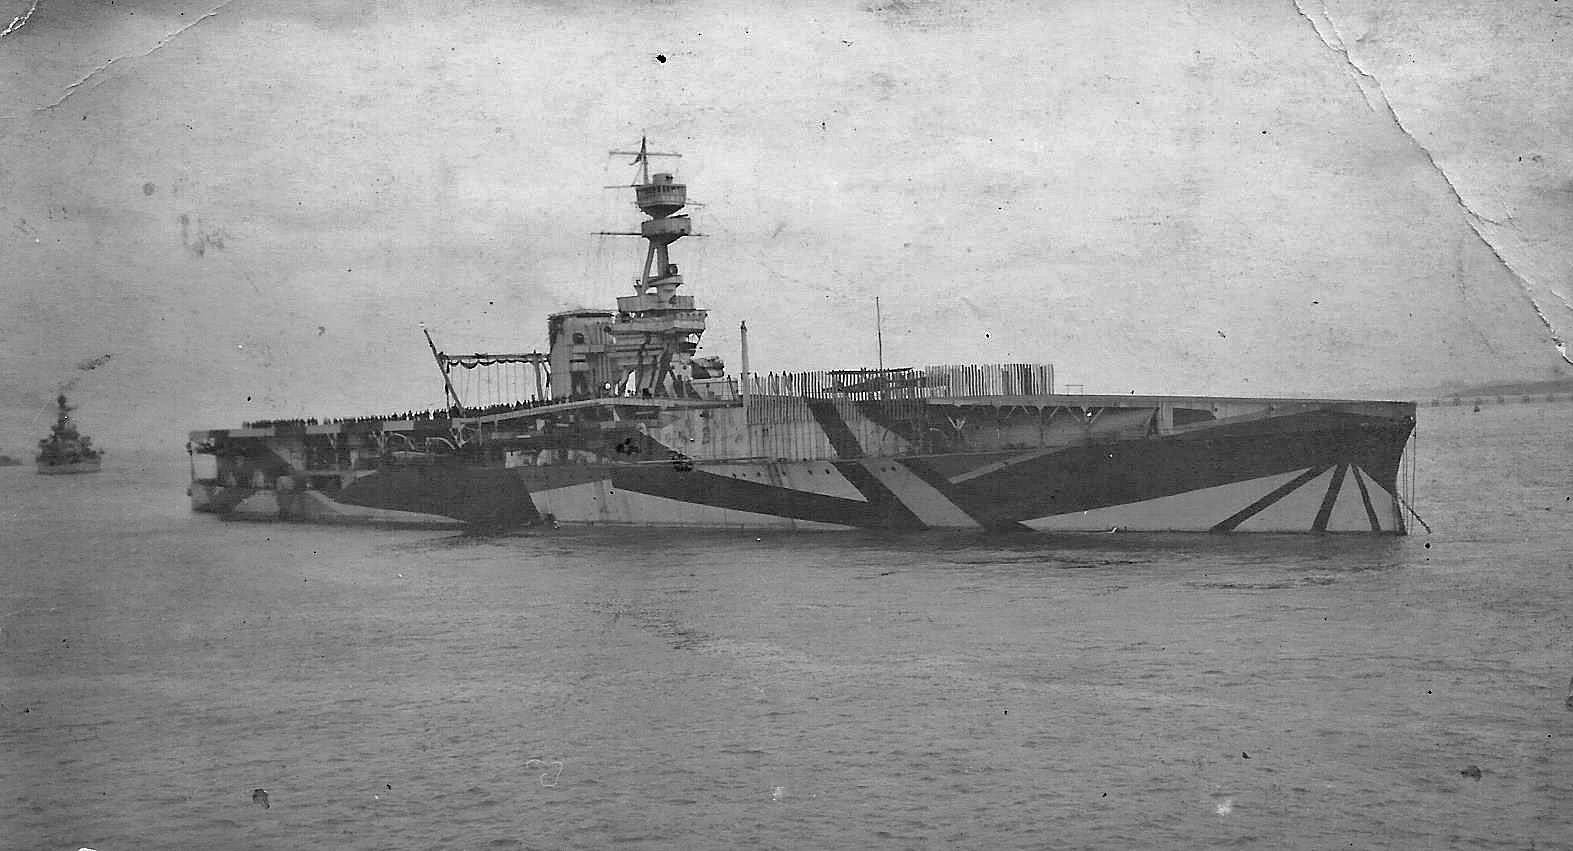 HMS Furious at anchor with aircraft on deck